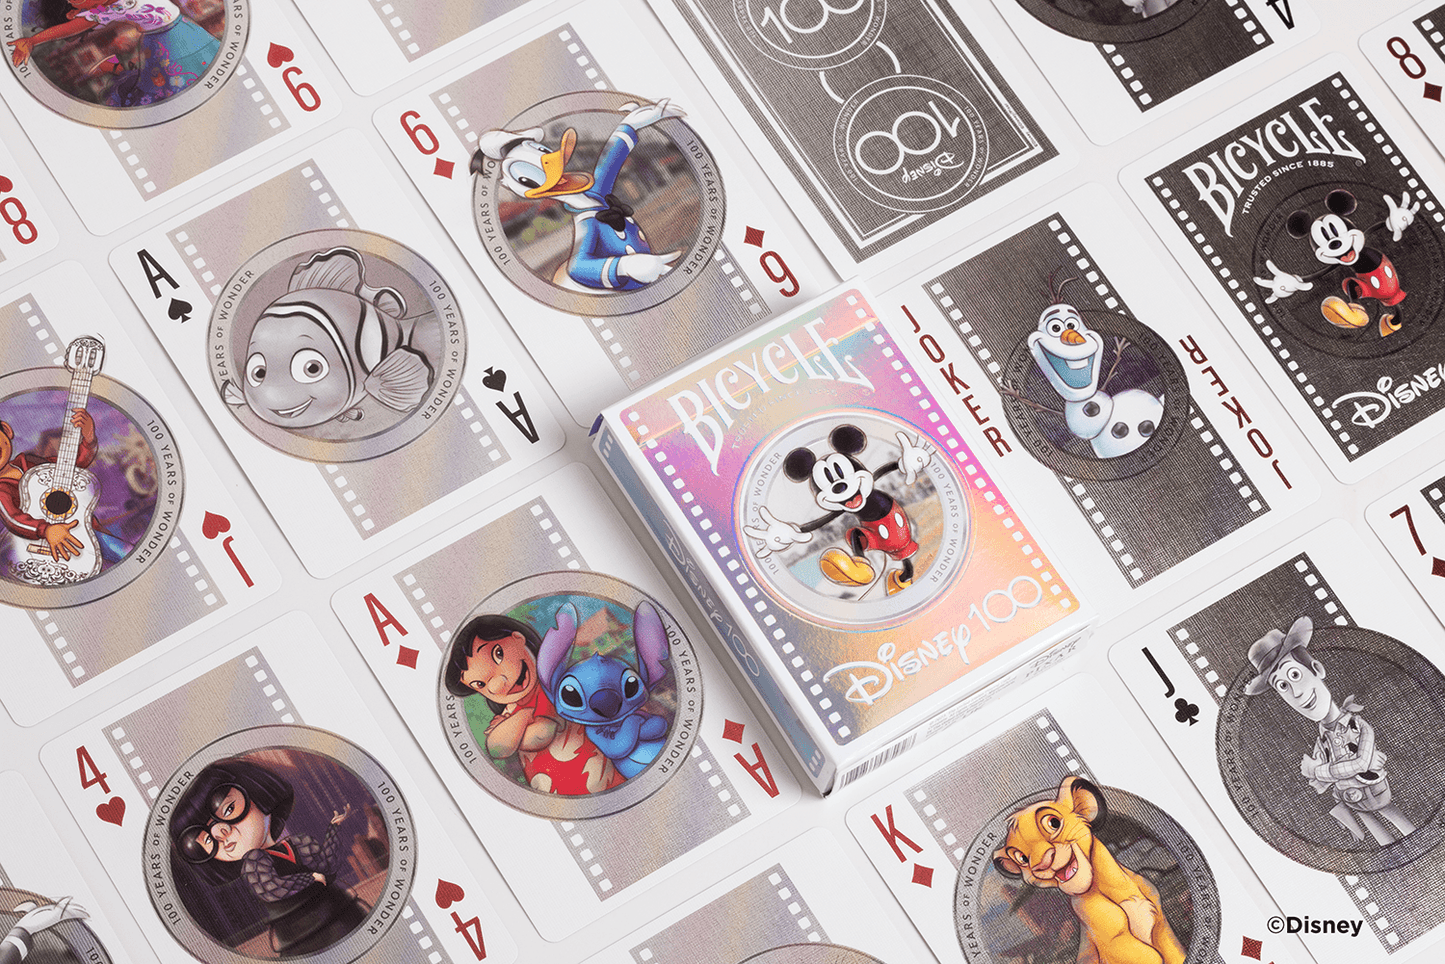 Bycicle - Disney 100 Anniversary Special Edition Playing Cards